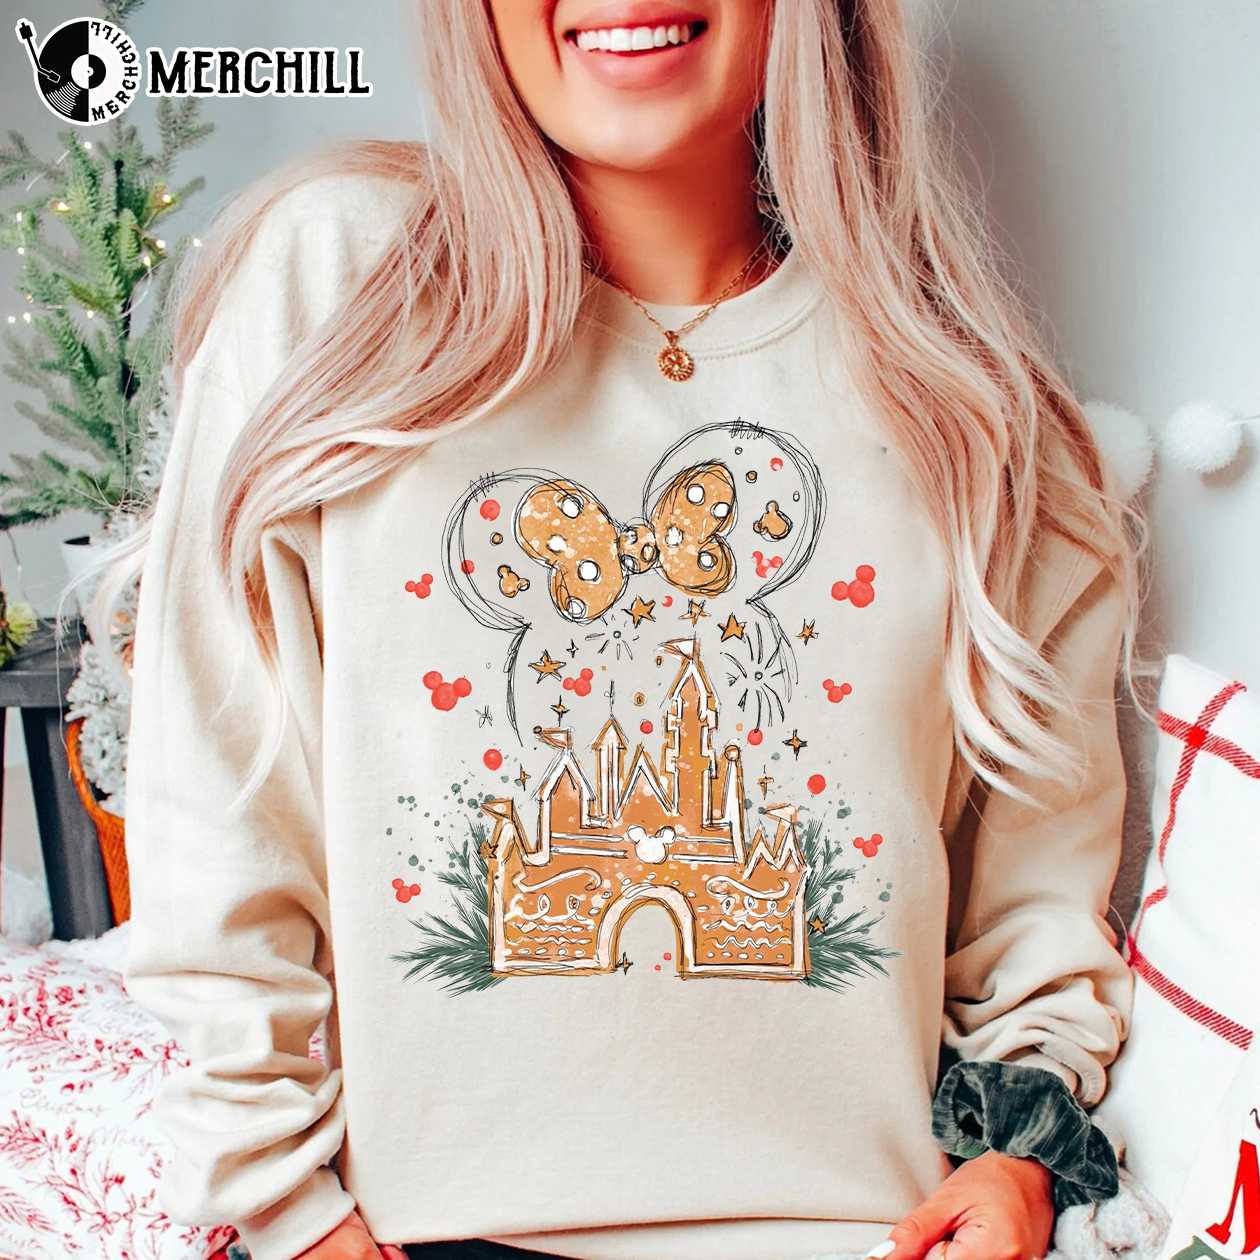 https://images.merchill.com/wp-content/uploads/2022/11/Minnie-Mouse-Christmas-Shirt-Disneyland-Christmas-Shirts-Gifts-for-Disney-Lovers.jpg